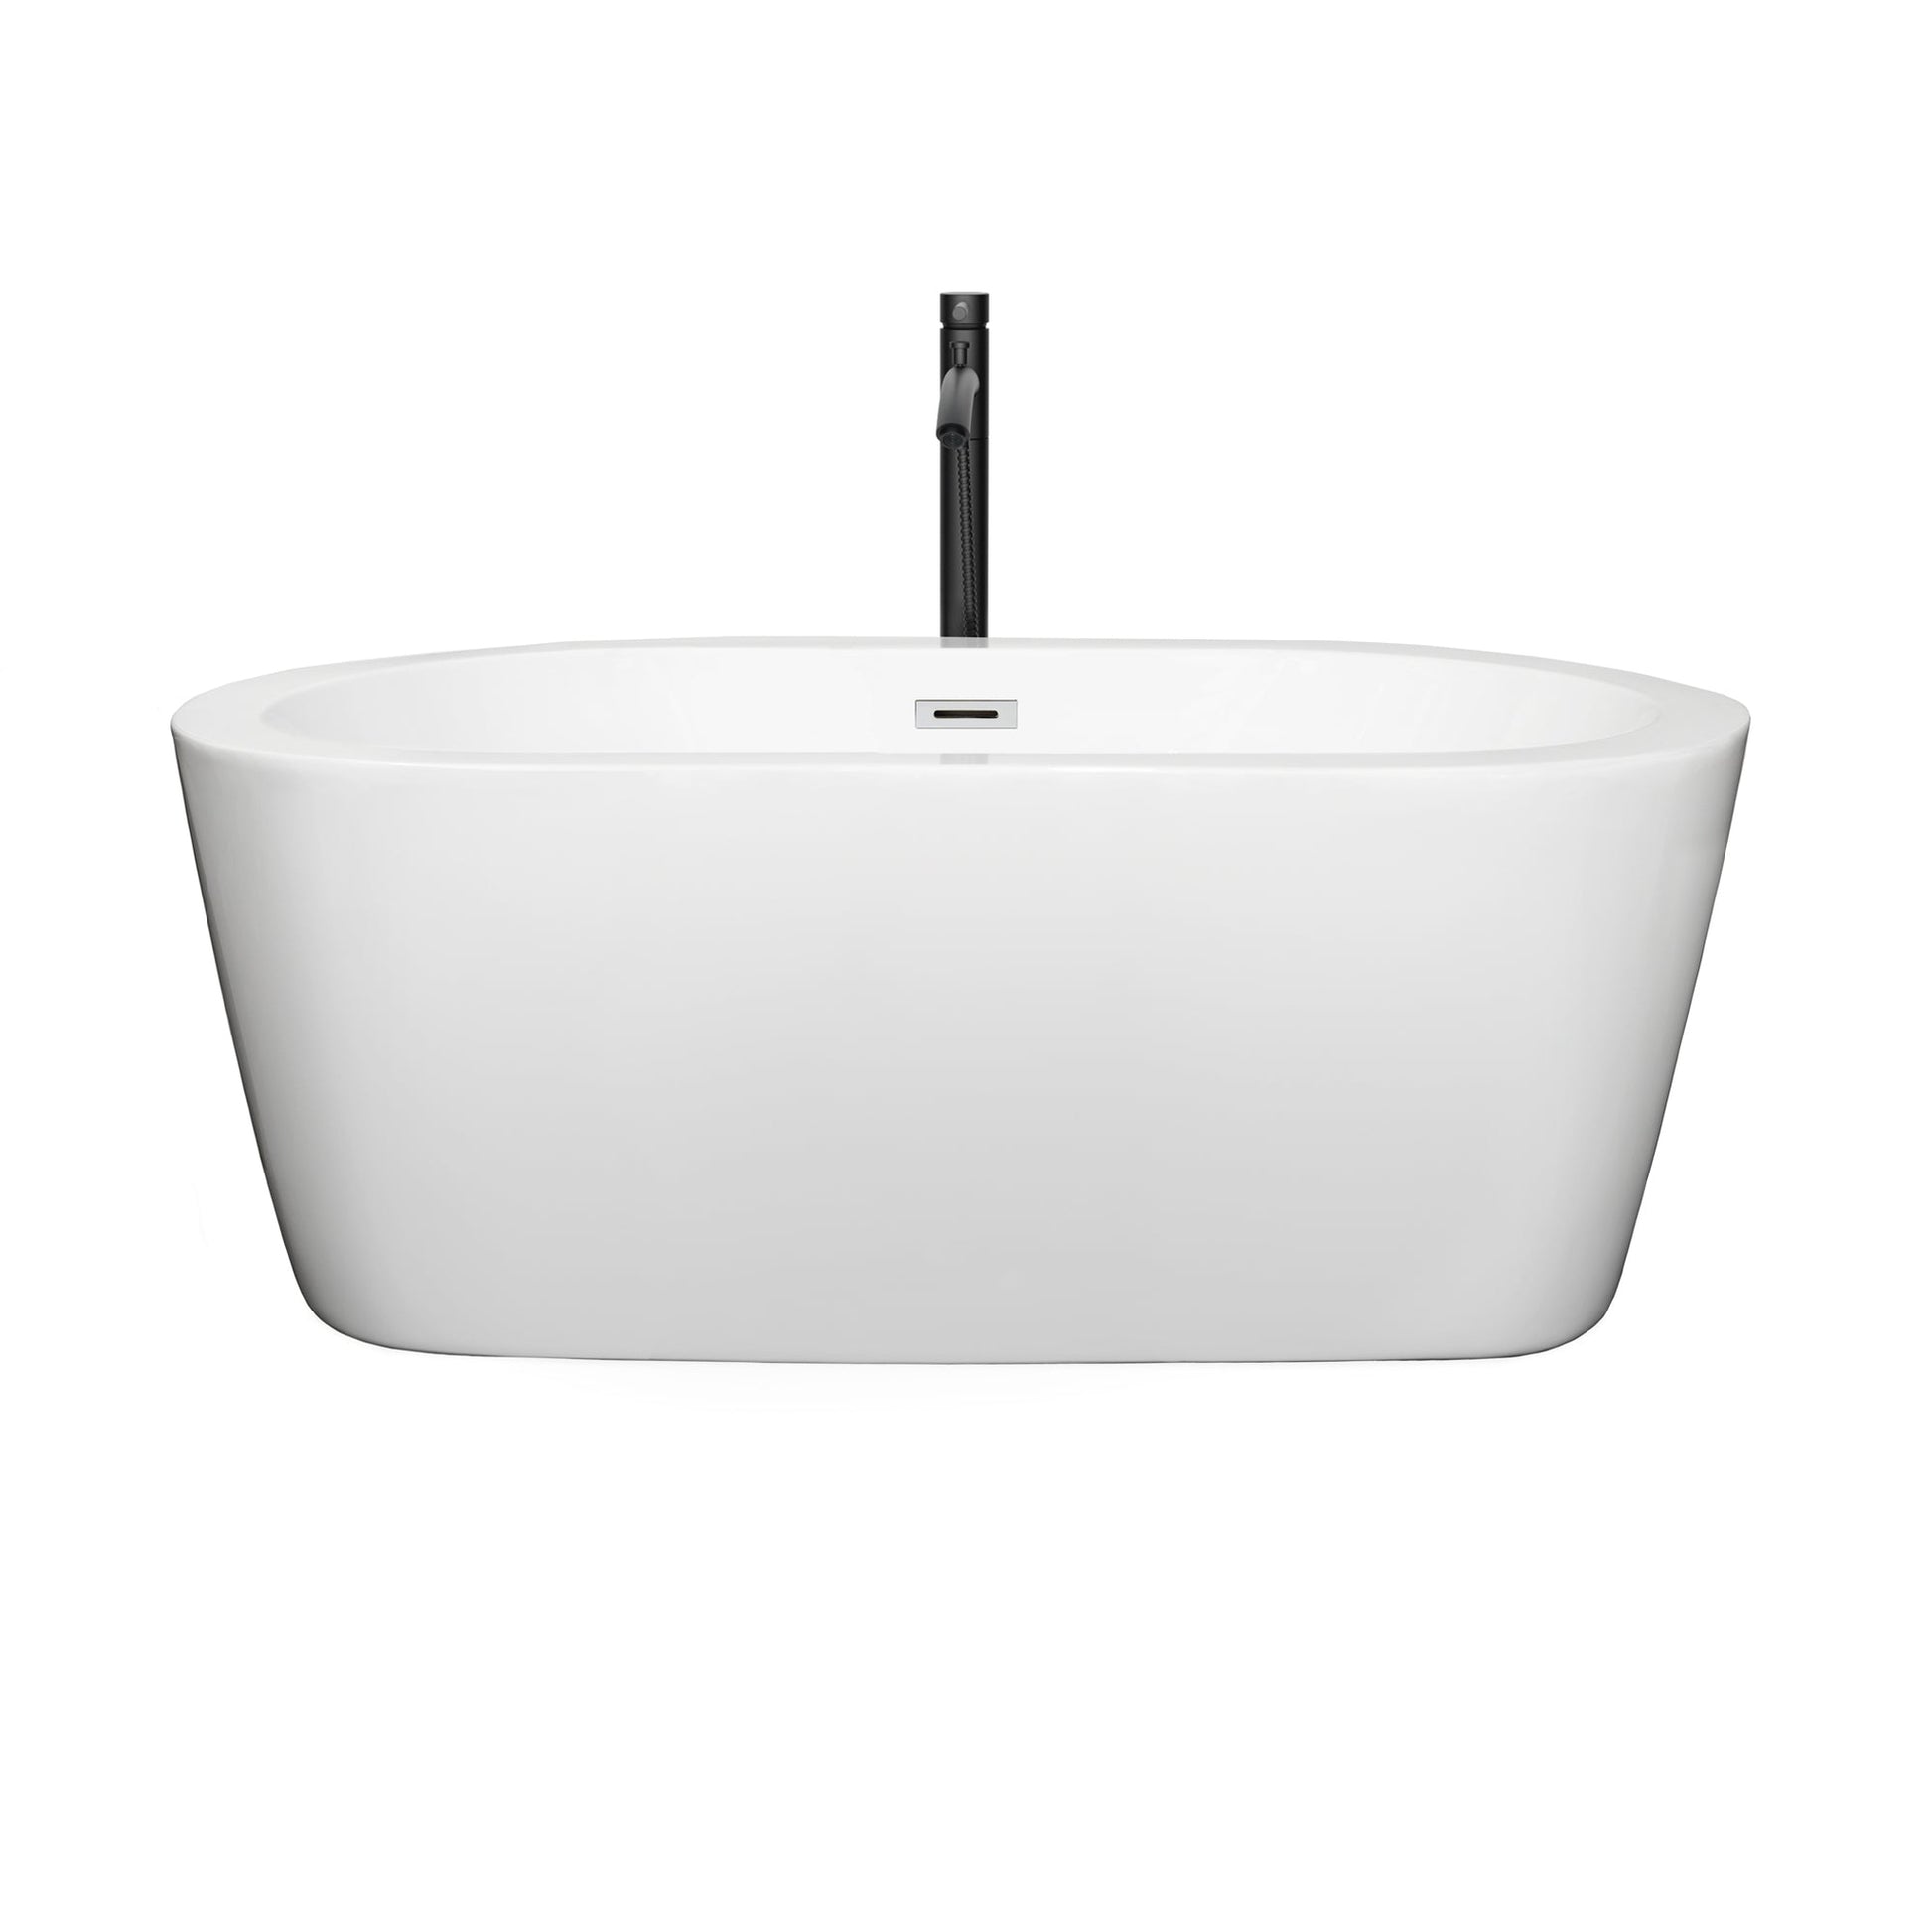 Wyndham Collection Mermaid 60" Freestanding Bathtub in White With Polished Chrome Trim and Floor Mounted Faucet in Matte Black